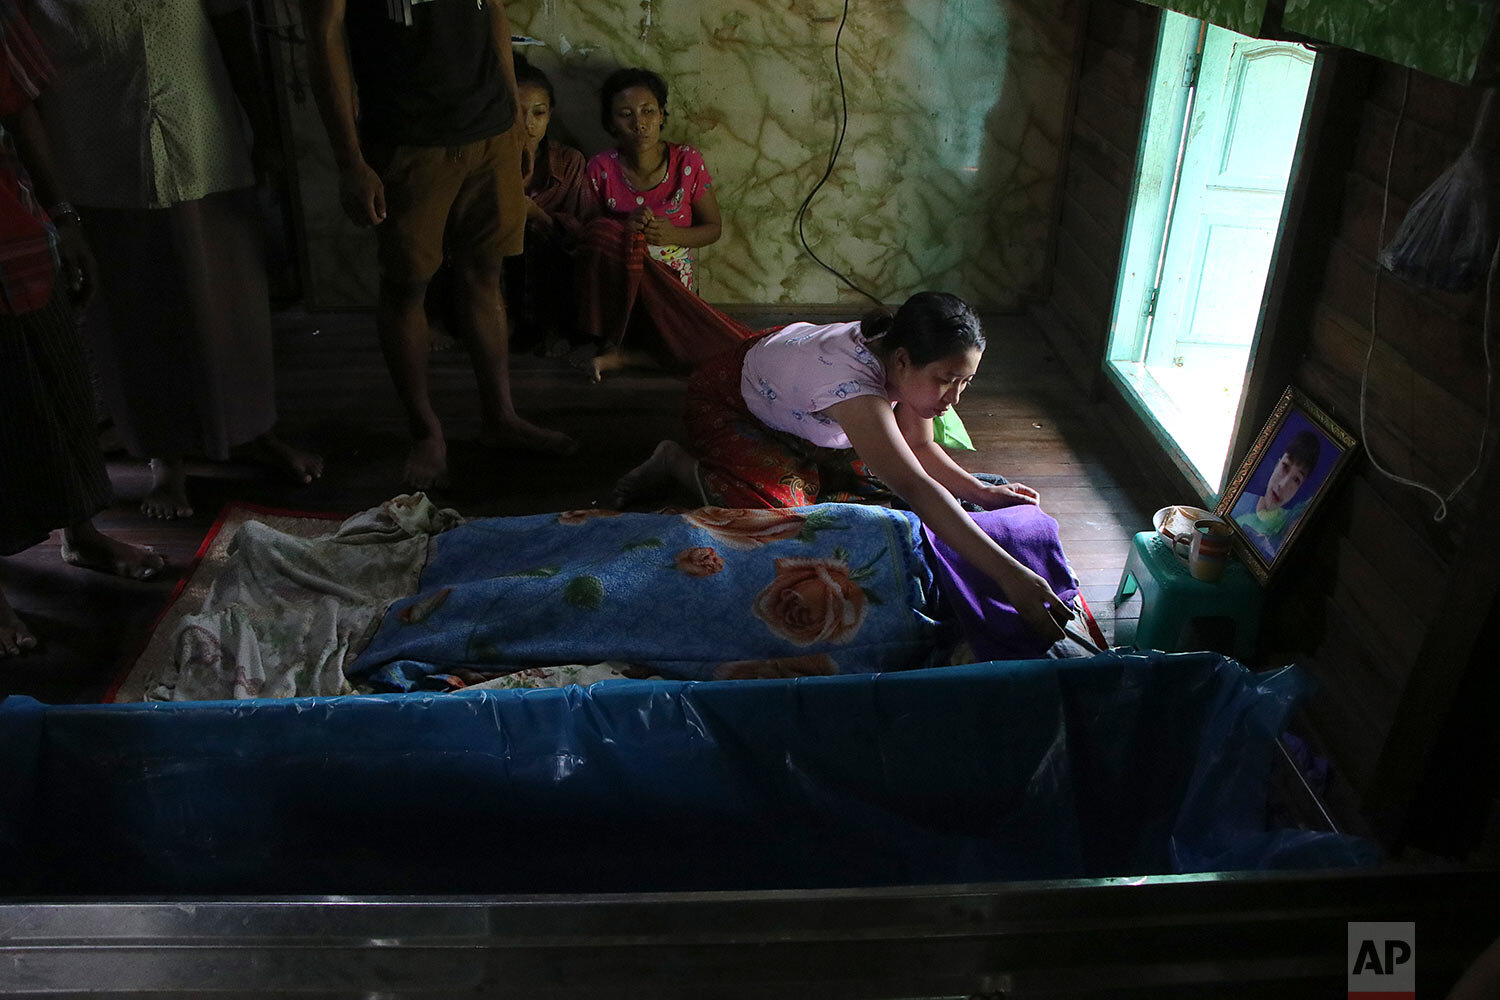  Friends and relatives mourn Saturday, March 27, 2021, over the body of Kyaw Htet Aung, 17, who was fatally shot in the neck by soldiers in Dala Township, Yangon, Myanmar. (AP Photo) 